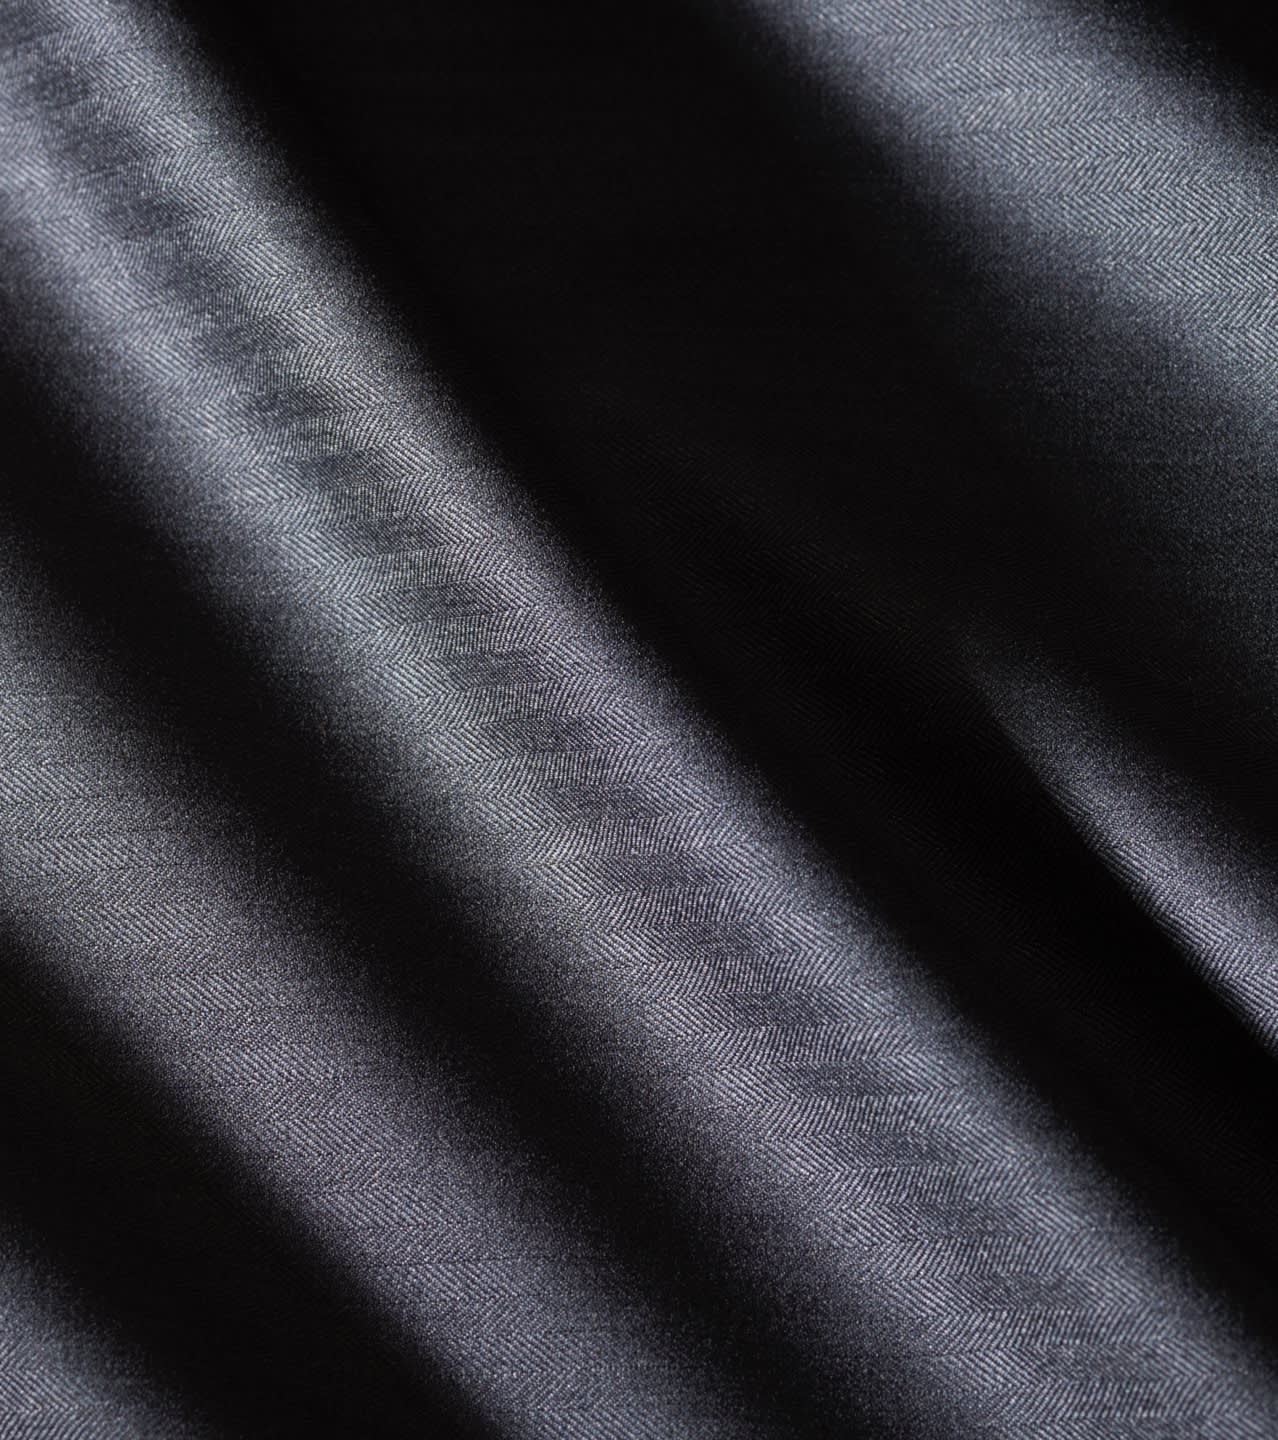 A dark blue cashmere fabric from the Brioni Bespoke selection